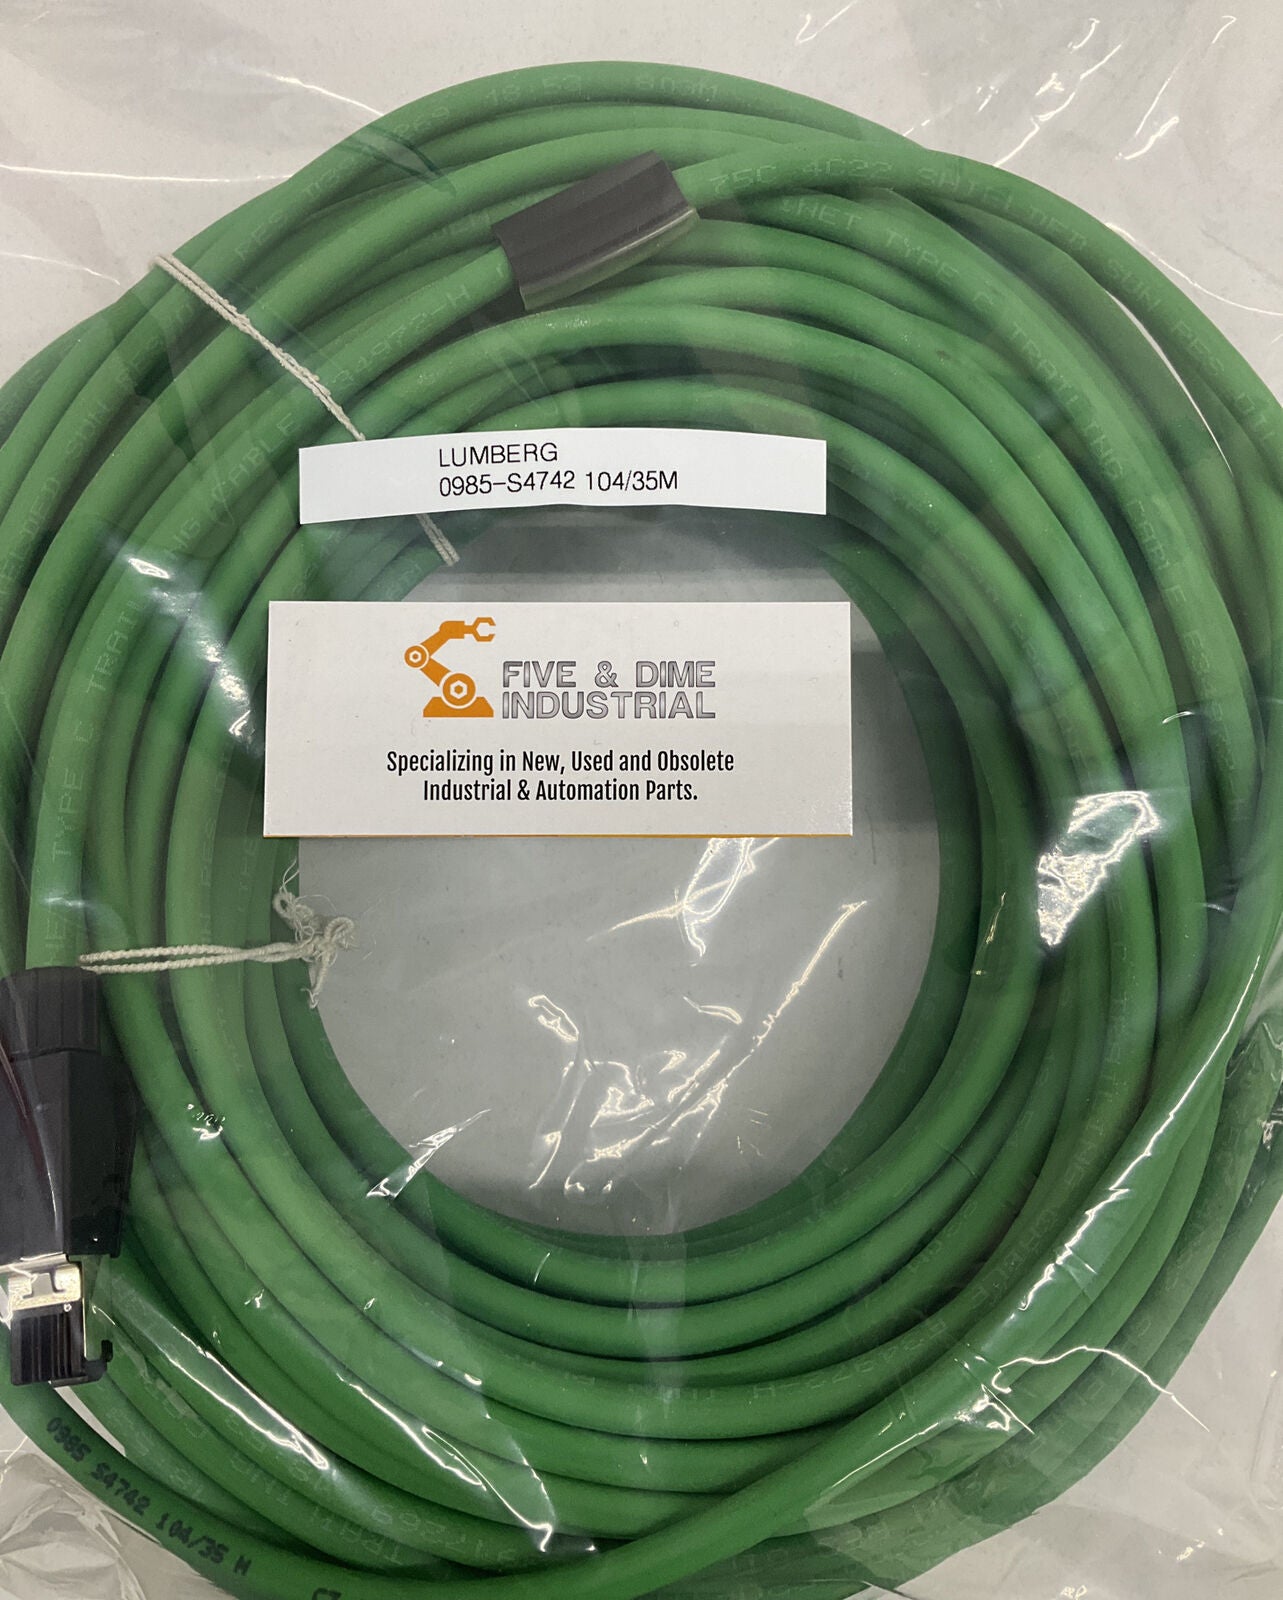 Lumberg 0985-S4742 New ETHERNET CABLE 104/35M (CBL122)